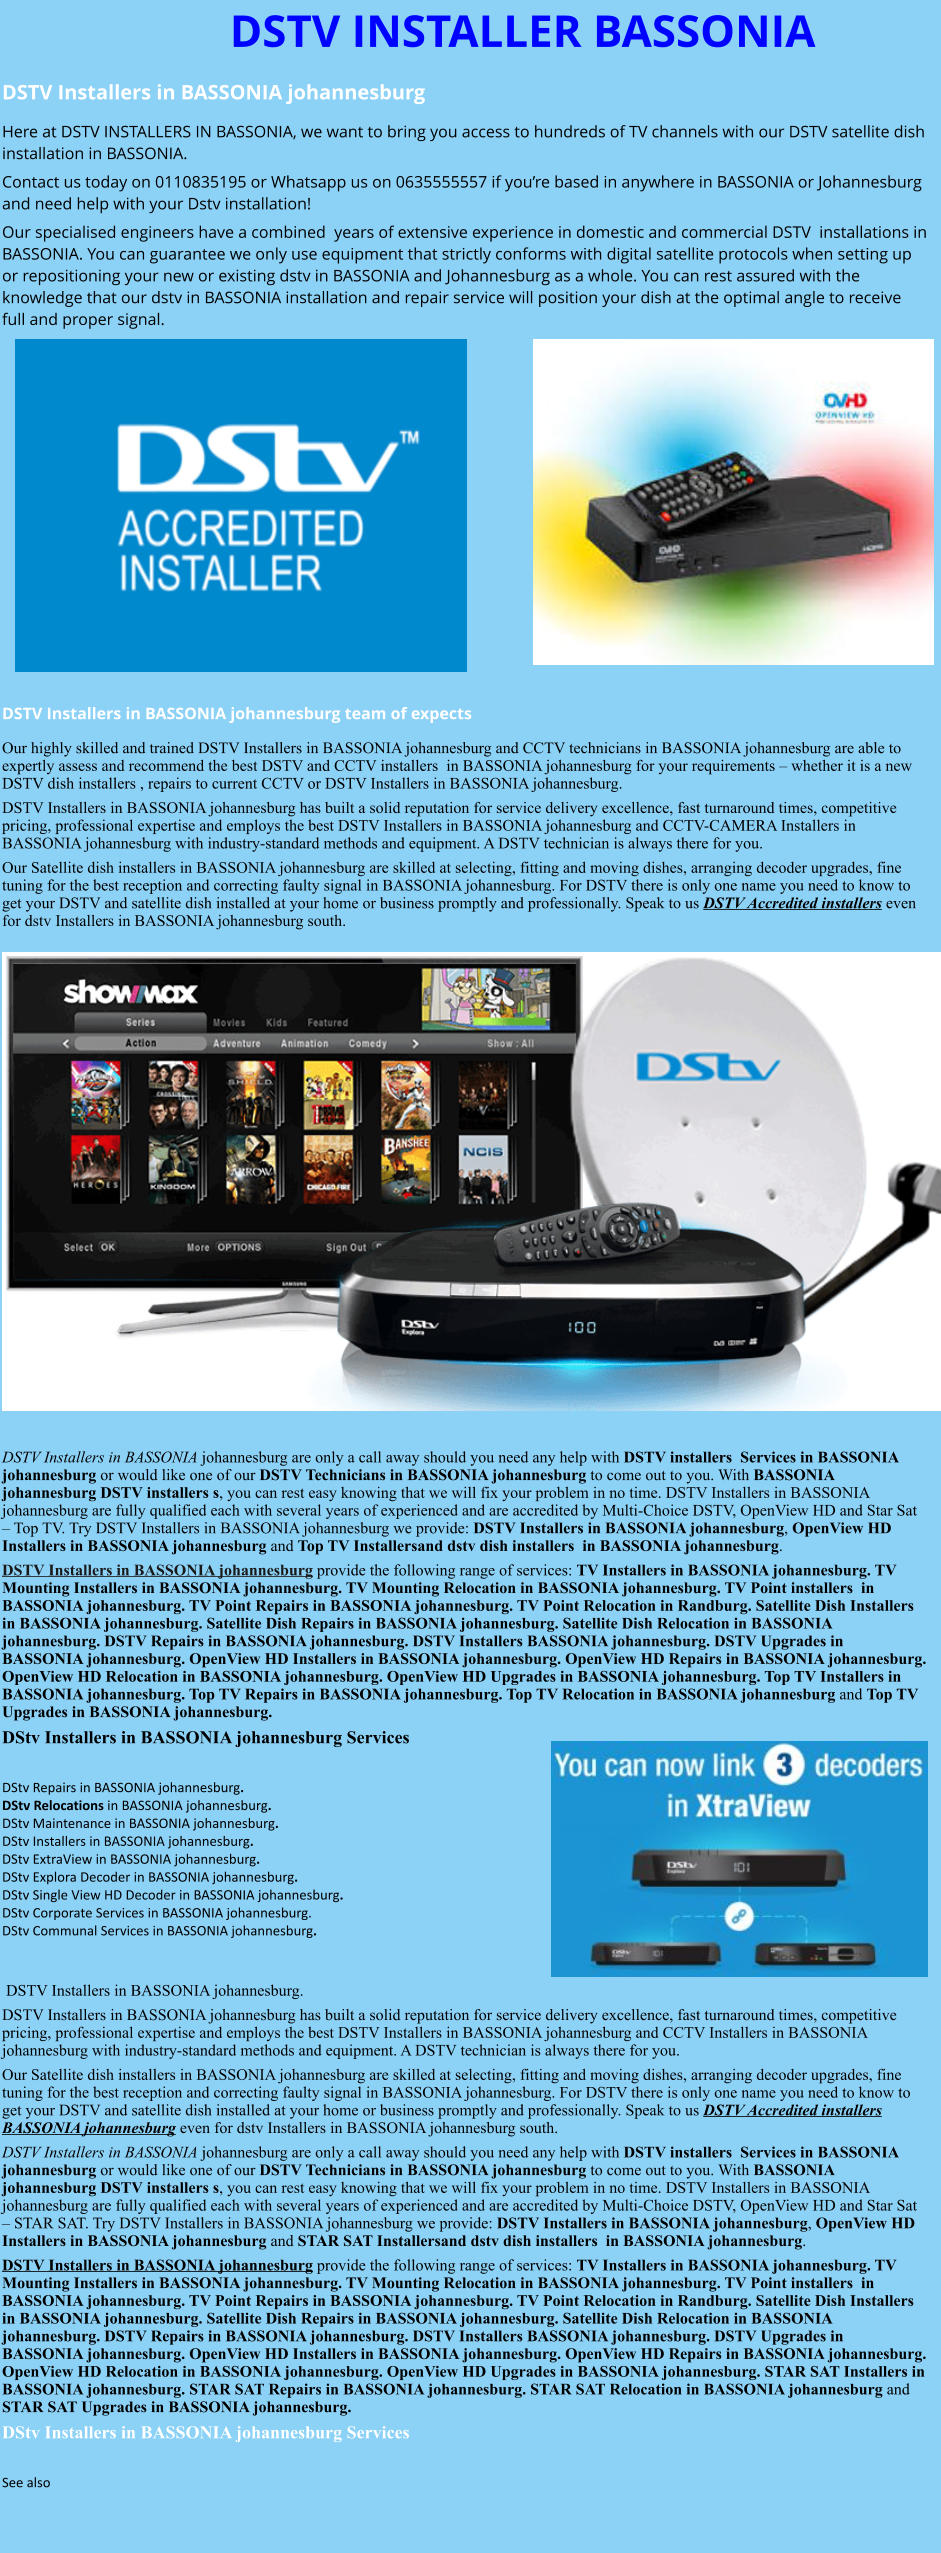 DSTV INSTALLER BASSONIA DSTV Installers in BASSONIA johannesburg  Here at DSTV INSTALLERS IN BASSONIA, we want to bring you access to hundreds of TV channels with our DSTV satellite dish installation in BASSONIA. Contact us today on 0110835195 or Whatsapp us on 0635555557 if you’re based in anywhere in BASSONIA or Johannesburg and need help with your Dstv installation! Our specialised engineers have a combined  years of extensive experience in domestic and commercial DSTV  installations in BASSONIA. You can guarantee we only use equipment that strictly conforms with digital satellite protocols when setting up or repositioning your new or existing dstv in BASSONIA and Johannesburg as a whole. You can rest assured with the knowledge that our dstv in BASSONIA installation and repair service will position your dish at the optimal angle to receive full and proper signal.                DSTV Installers in BASSONIA johannesburg team of expects Our highly skilled and trained DSTV Installers in BASSONIA johannesburg and CCTV technicians in BASSONIA johannesburg are able to expertly assess and recommend the best DSTV and CCTV installers  in BASSONIA johannesburg for your requirements – whether it is a new DSTV dish installers , repairs to current CCTV or DSTV Installers in BASSONIA johannesburg. DSTV Installers in BASSONIA johannesburg has built a solid reputation for service delivery excellence, fast turnaround times, competitive pricing, professional expertise and employs the best DSTV Installers in BASSONIA johannesburg and CCTV-CAMERA Installers in BASSONIA johannesburg with industry-standard methods and equipment. A DSTV technician is always there for you. Our Satellite dish installers in BASSONIA johannesburg are skilled at selecting, fitting and moving dishes, arranging decoder upgrades, fine tuning for the best reception and correcting faulty signal in BASSONIA johannesburg. For DSTV there is only one name you need to know to get your DSTV and satellite dish installed at your home or business promptly and professionally. Speak to us DSTV Accredited installers even for dstv Installers in BASSONIA johannesburg south.                      DSTV Installers in BASSONIA johannesburg are only a call away should you need any help with DSTV installers  Services in BASSONIA johannesburg or would like one of our DSTV Technicians in BASSONIA johannesburg to come out to you. With BASSONIA johannesburg DSTV installers s, you can rest easy knowing that we will fix your problem in no time. DSTV Installers in BASSONIA johannesburg are fully qualified each with several years of experienced and are accredited by Multi-Choice DSTV, OpenView HD and Star Sat – Top TV. Try DSTV Installers in BASSONIA johannesburg we provide: DSTV Installers in BASSONIA johannesburg, OpenView HD Installers in BASSONIA johannesburg and Top TV Installersand dstv dish installers  in BASSONIA johannesburg. DSTV Installers in BASSONIA johannesburg provide the following range of services: TV Installers in BASSONIA johannesburg. TV Mounting Installers in BASSONIA johannesburg. TV Mounting Relocation in BASSONIA johannesburg. TV Point installers  in BASSONIA johannesburg. TV Point Repairs in BASSONIA johannesburg. TV Point Relocation in Randburg. Satellite Dish Installers in BASSONIA johannesburg. Satellite Dish Repairs in BASSONIA johannesburg. Satellite Dish Relocation in BASSONIA johannesburg. DSTV Repairs in BASSONIA johannesburg. DSTV Installers BASSONIA johannesburg. DSTV Upgrades in BASSONIA johannesburg. OpenView HD Installers in BASSONIA johannesburg. OpenView HD Repairs in BASSONIA johannesburg. OpenView HD Relocation in BASSONIA johannesburg. OpenView HD Upgrades in BASSONIA johannesburg. Top TV Installers in BASSONIA johannesburg. Top TV Repairs in BASSONIA johannesburg. Top TV Relocation in BASSONIA johannesburg and Top TV Upgrades in BASSONIA johannesburg. DStv Installers in BASSONIA johannesburg Services  DStv Repairs in BASSONIA johannesburg.  DStv Relocations in BASSONIA johannesburg.  DStv Maintenance in BASSONIA johannesburg. DStv Installers in BASSONIA johannesburg. DStv ExtraView in BASSONIA johannesburg. DStv Explora Decoder in BASSONIA johannesburg. DStv Single View HD Decoder in BASSONIA johannesburg. DStv Corporate Services in BASSONIA johannesburg. DStv Communal Services in BASSONIA johannesburg.    DSTV Installers in BASSONIA johannesburg. DSTV Installers in BASSONIA johannesburg has built a solid reputation for service delivery excellence, fast turnaround times, competitive pricing, professional expertise and employs the best DSTV Installers in BASSONIA johannesburg and CCTV Installers in BASSONIA johannesburg with industry-standard methods and equipment. A DSTV technician is always there for you. Our Satellite dish installers in BASSONIA johannesburg are skilled at selecting, fitting and moving dishes, arranging decoder upgrades, fine tuning for the best reception and correcting faulty signal in BASSONIA johannesburg. For DSTV there is only one name you need to know to get your DSTV and satellite dish installed at your home or business promptly and professionally. Speak to us DSTV Accredited installers BASSONIA johannesburg even for dstv Installers in BASSONIA johannesburg south. DSTV Installers in BASSONIA johannesburg are only a call away should you need any help with DSTV installers  Services in BASSONIA johannesburg or would like one of our DSTV Technicians in BASSONIA johannesburg to come out to you. With BASSONIA johannesburg DSTV installers s, you can rest easy knowing that we will fix your problem in no time. DSTV Installers in BASSONIA johannesburg are fully qualified each with several years of experienced and are accredited by Multi-Choice DSTV, OpenView HD and Star Sat – STAR SAT. Try DSTV Installers in BASSONIA johannesburg we provide: DSTV Installers in BASSONIA johannesburg, OpenView HD Installers in BASSONIA johannesburg and STAR SAT Installersand dstv dish installers  in BASSONIA johannesburg. DSTV Installers in BASSONIA johannesburg provide the following range of services: TV Installers in BASSONIA johannesburg. TV Mounting Installers in BASSONIA johannesburg. TV Mounting Relocation in BASSONIA johannesburg. TV Point installers  in BASSONIA johannesburg. TV Point Repairs in BASSONIA johannesburg. TV Point Relocation in Randburg. Satellite Dish Installers in BASSONIA johannesburg. Satellite Dish Repairs in BASSONIA johannesburg. Satellite Dish Relocation in BASSONIA johannesburg. DSTV Repairs in BASSONIA johannesburg. DSTV Installers BASSONIA johannesburg. DSTV Upgrades in BASSONIA johannesburg. OpenView HD Installers in BASSONIA johannesburg. OpenView HD Repairs in BASSONIA johannesburg. OpenView HD Relocation in BASSONIA johannesburg. OpenView HD Upgrades in BASSONIA johannesburg. STAR SAT Installers in BASSONIA johannesburg. STAR SAT Repairs in BASSONIA johannesburg. STAR SAT Relocation in BASSONIA johannesburg and STAR SAT Upgrades in BASSONIA johannesburg. DStv Installers in BASSONIA johannesburg Services  See also